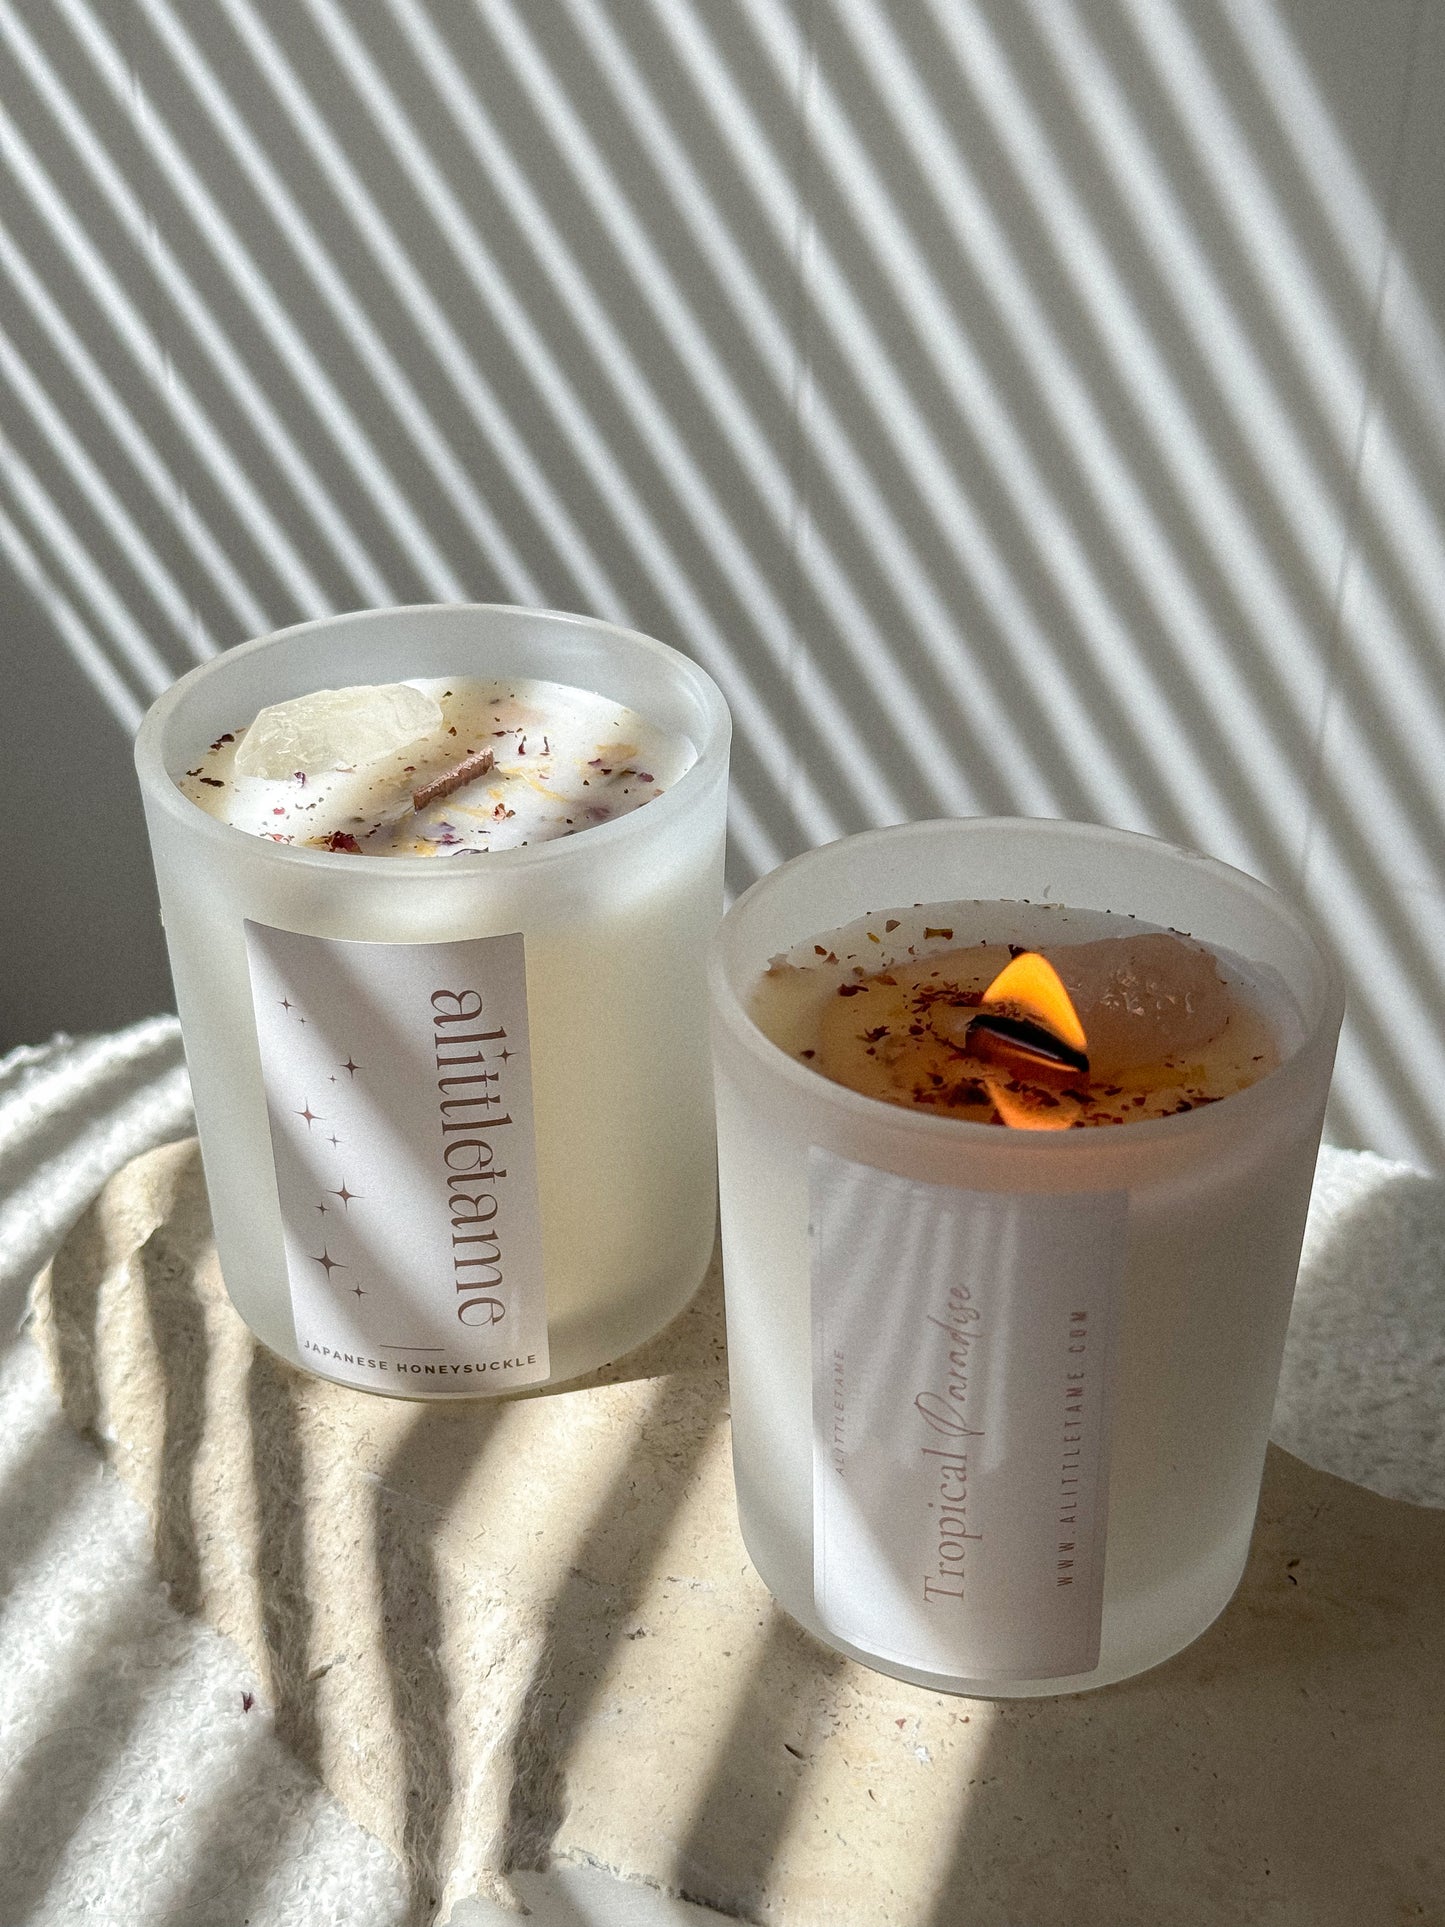 Crystal and floral infused candles